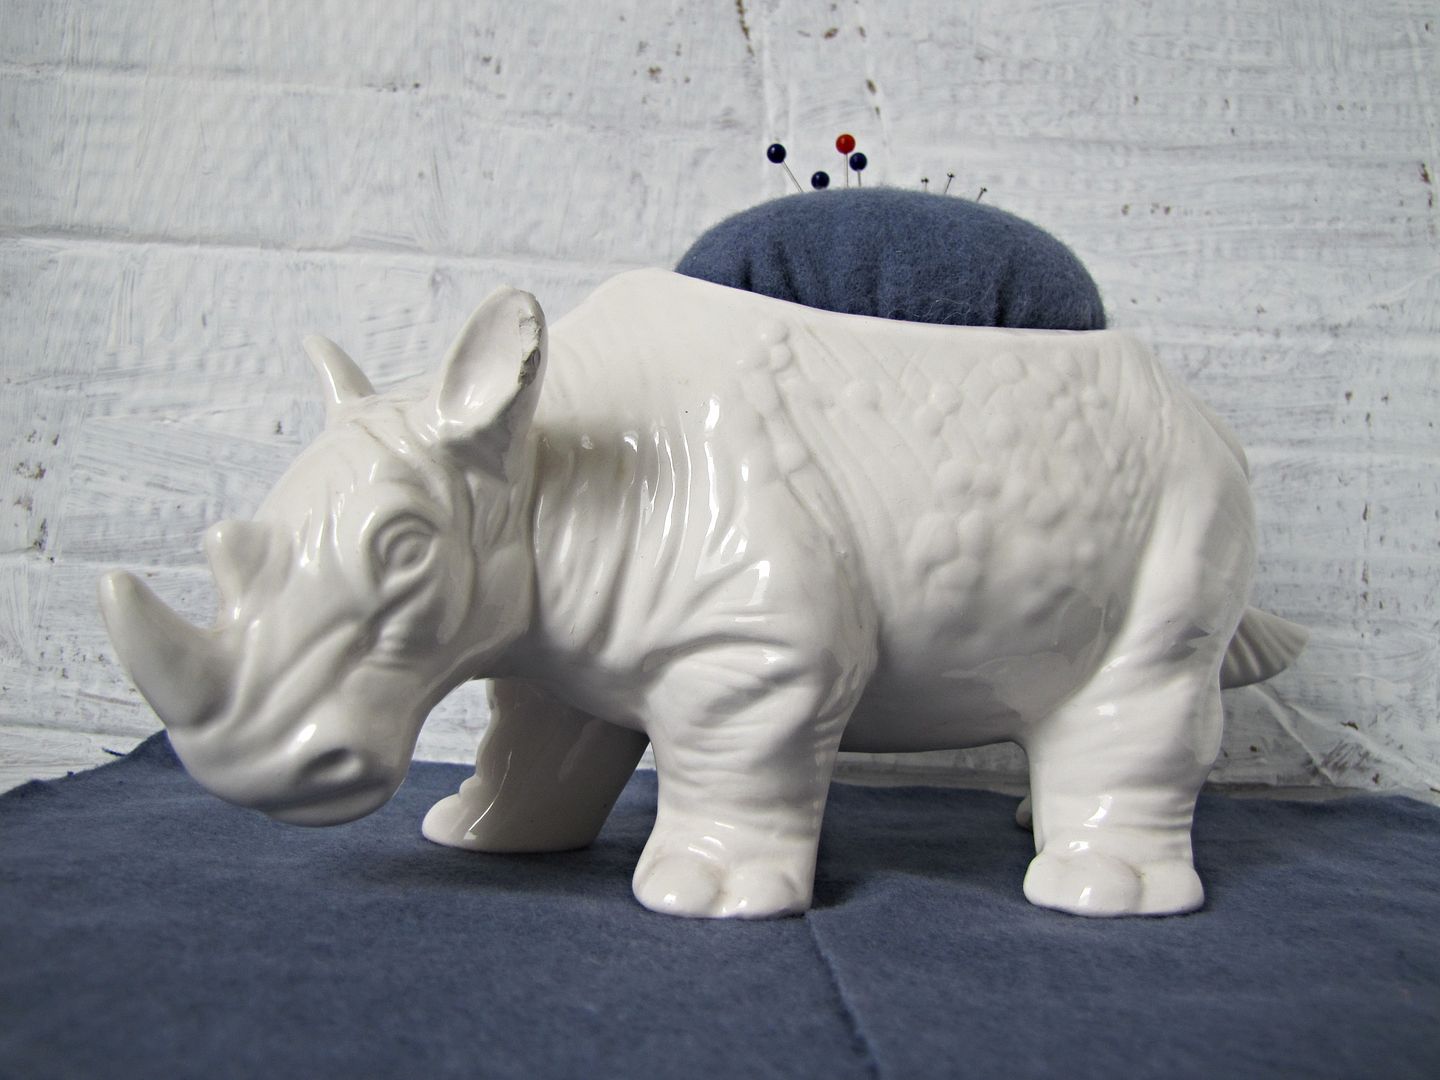 rhino pincushion from floral container - Indietutes.blogspot.com photo b0e5193a-dd25-4f7f-a05d-2e0b941ef9b5.jpg